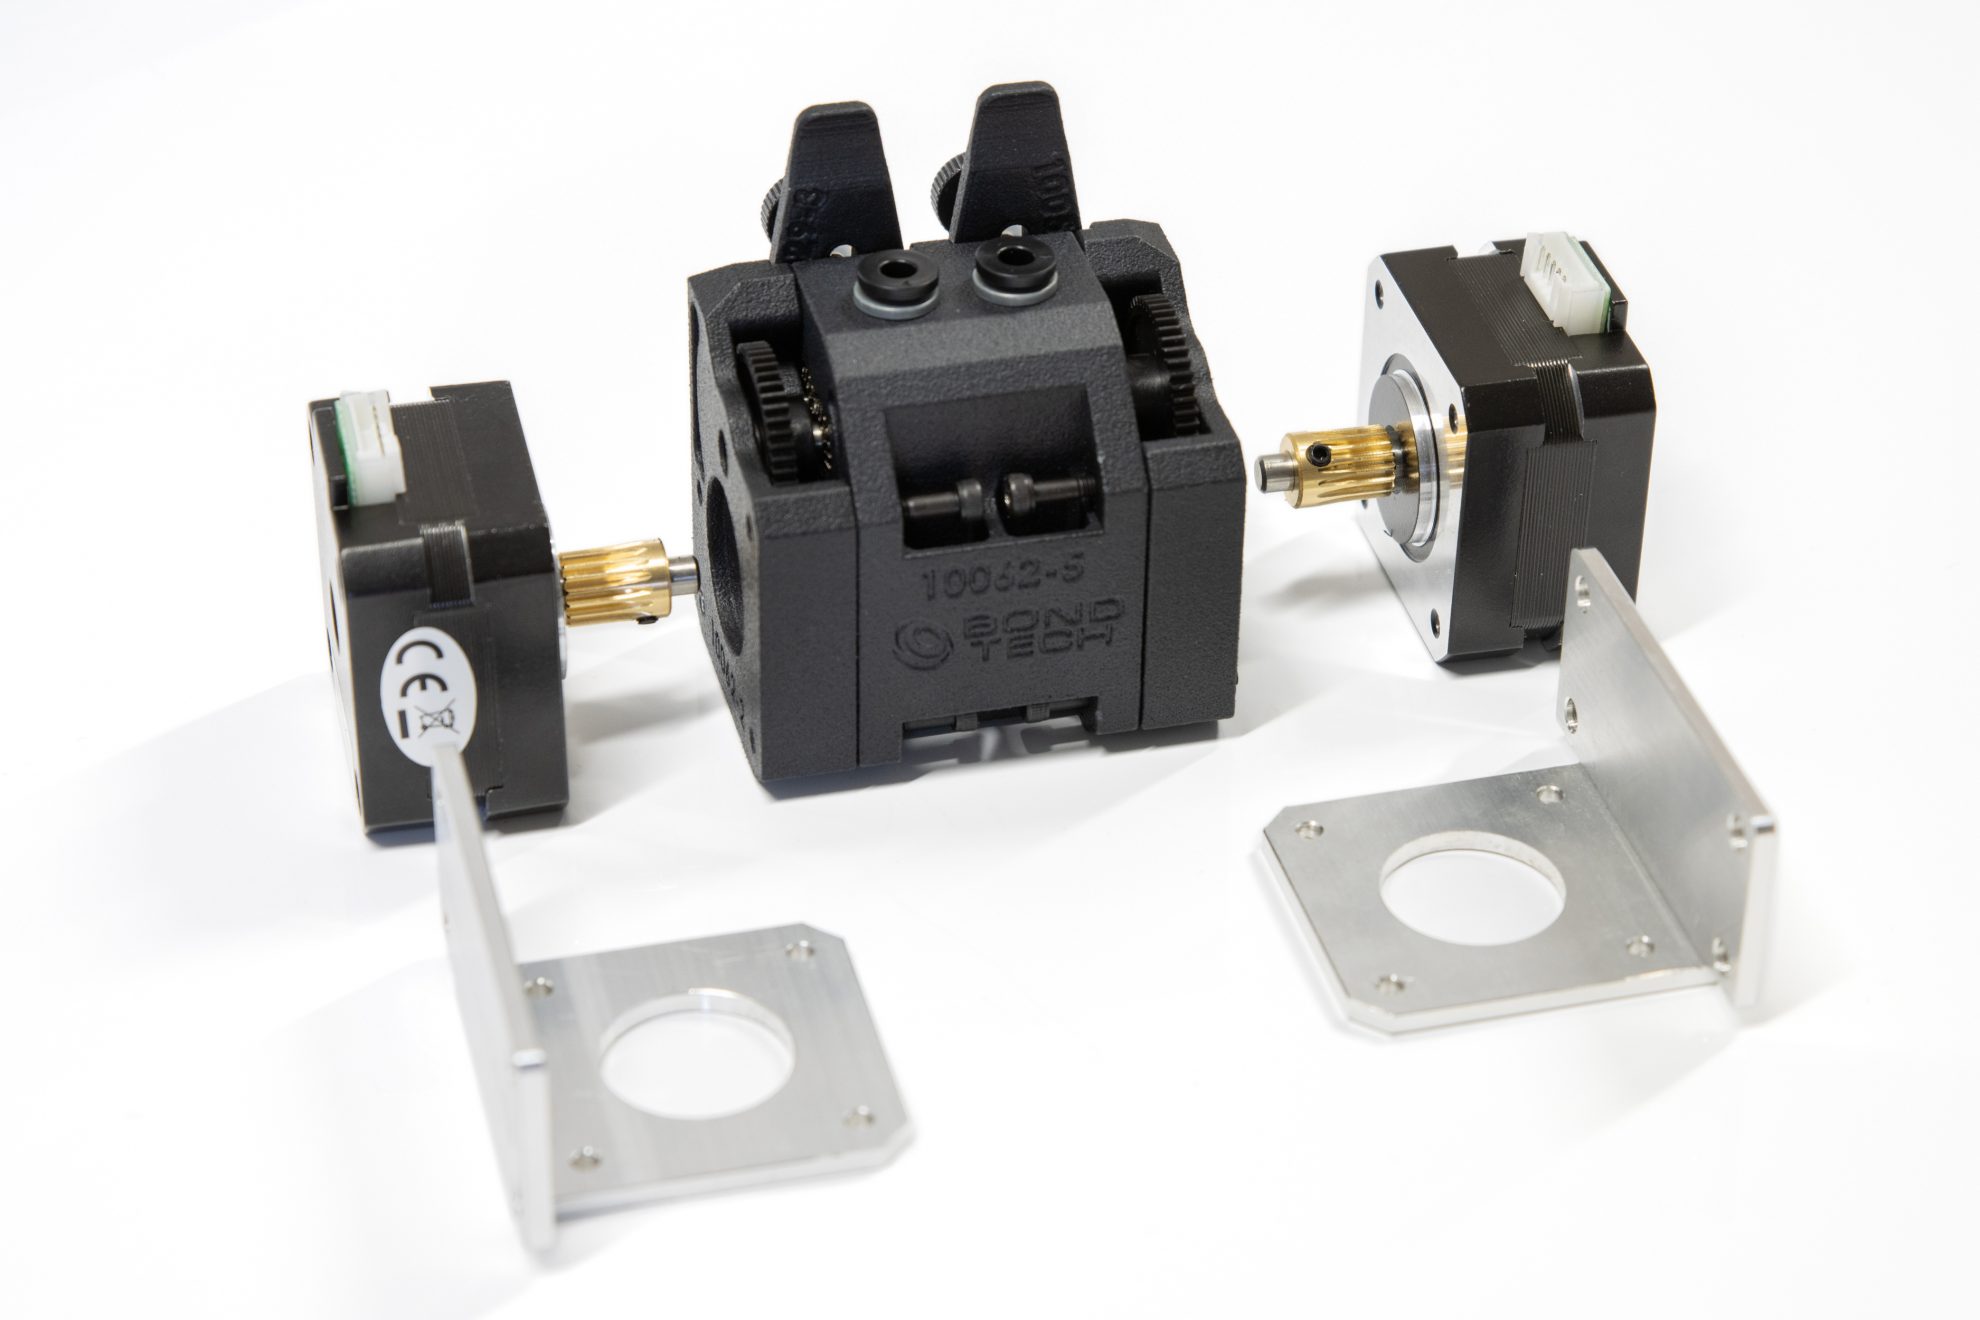 Bondtech Mini Geared BMG Extruder for groove mount Hotends